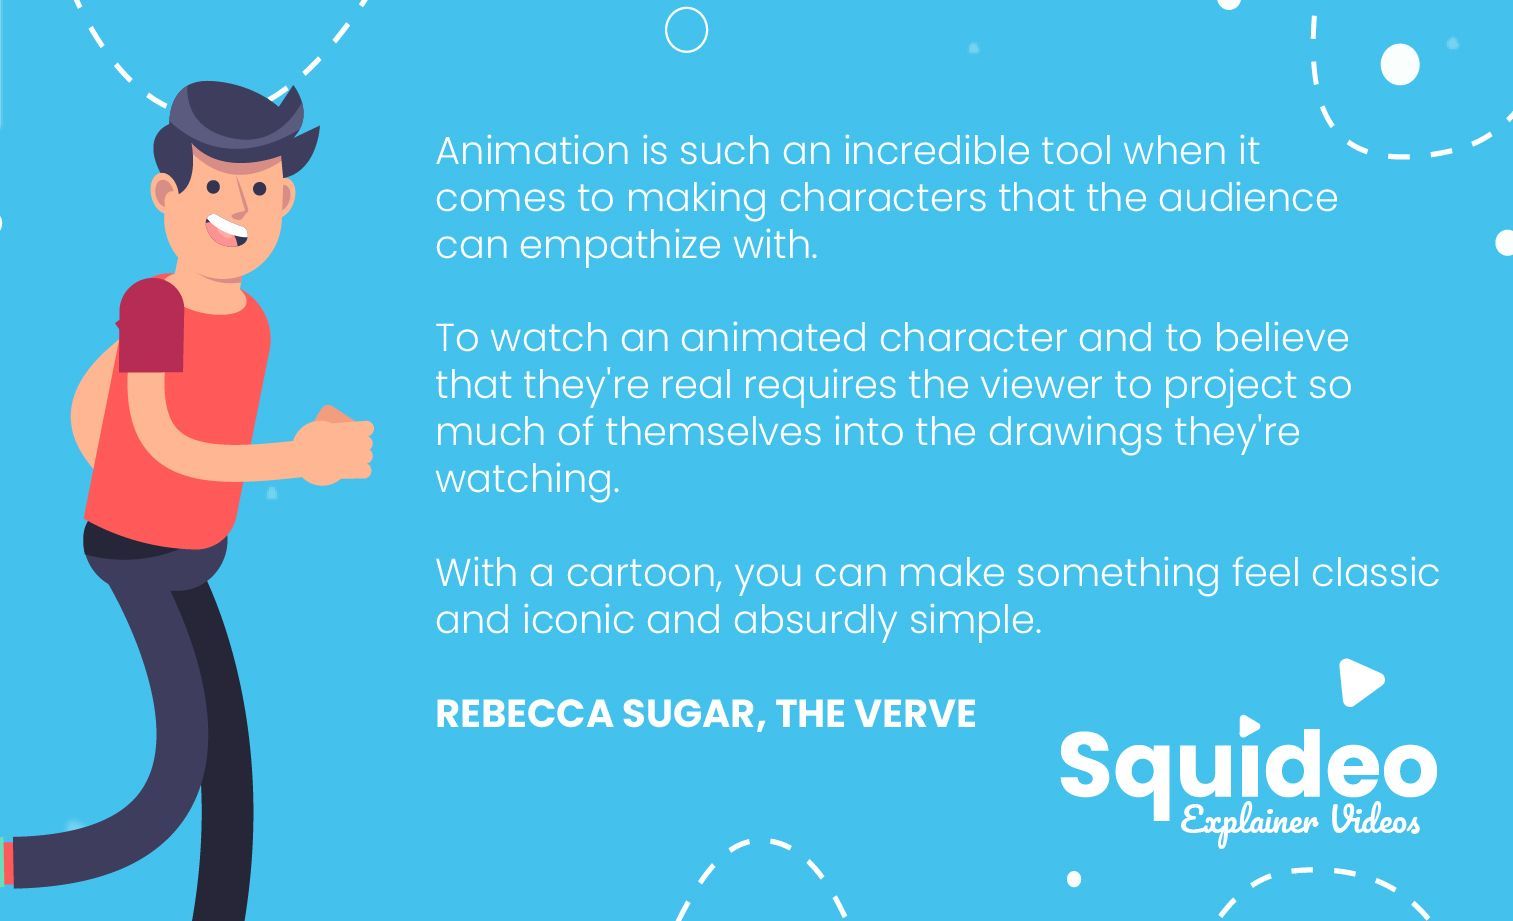 Animation is such an incredible tool when it comes to making characters that the audience can empathize with. To watch an animated character and to believe that they're real requires the viewer to project so much of themselves into the drawings they're watching. With a cartoon, you can make something feel classic and iconic and absurdly simple. REBECCA SUGAR, THE VERGE